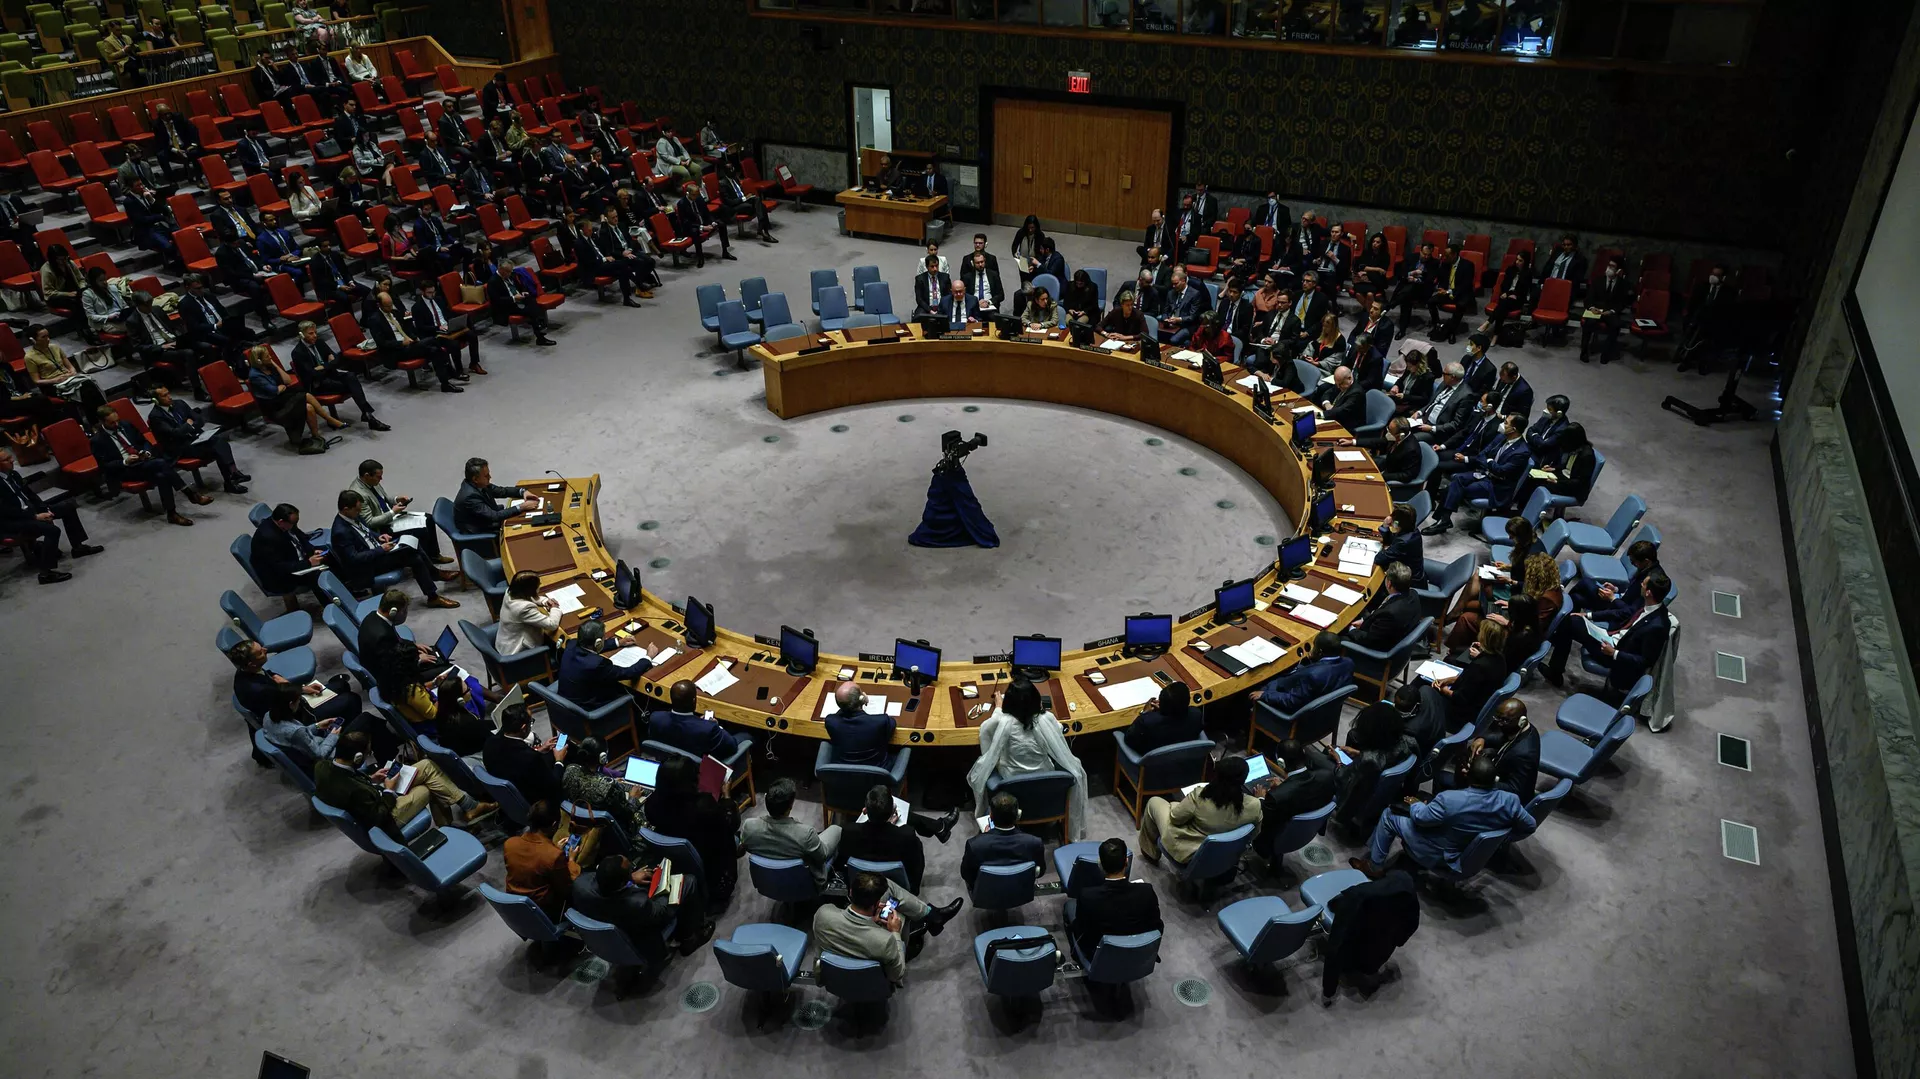 UN Security Council condemns Houthis attacks, Russia abstains